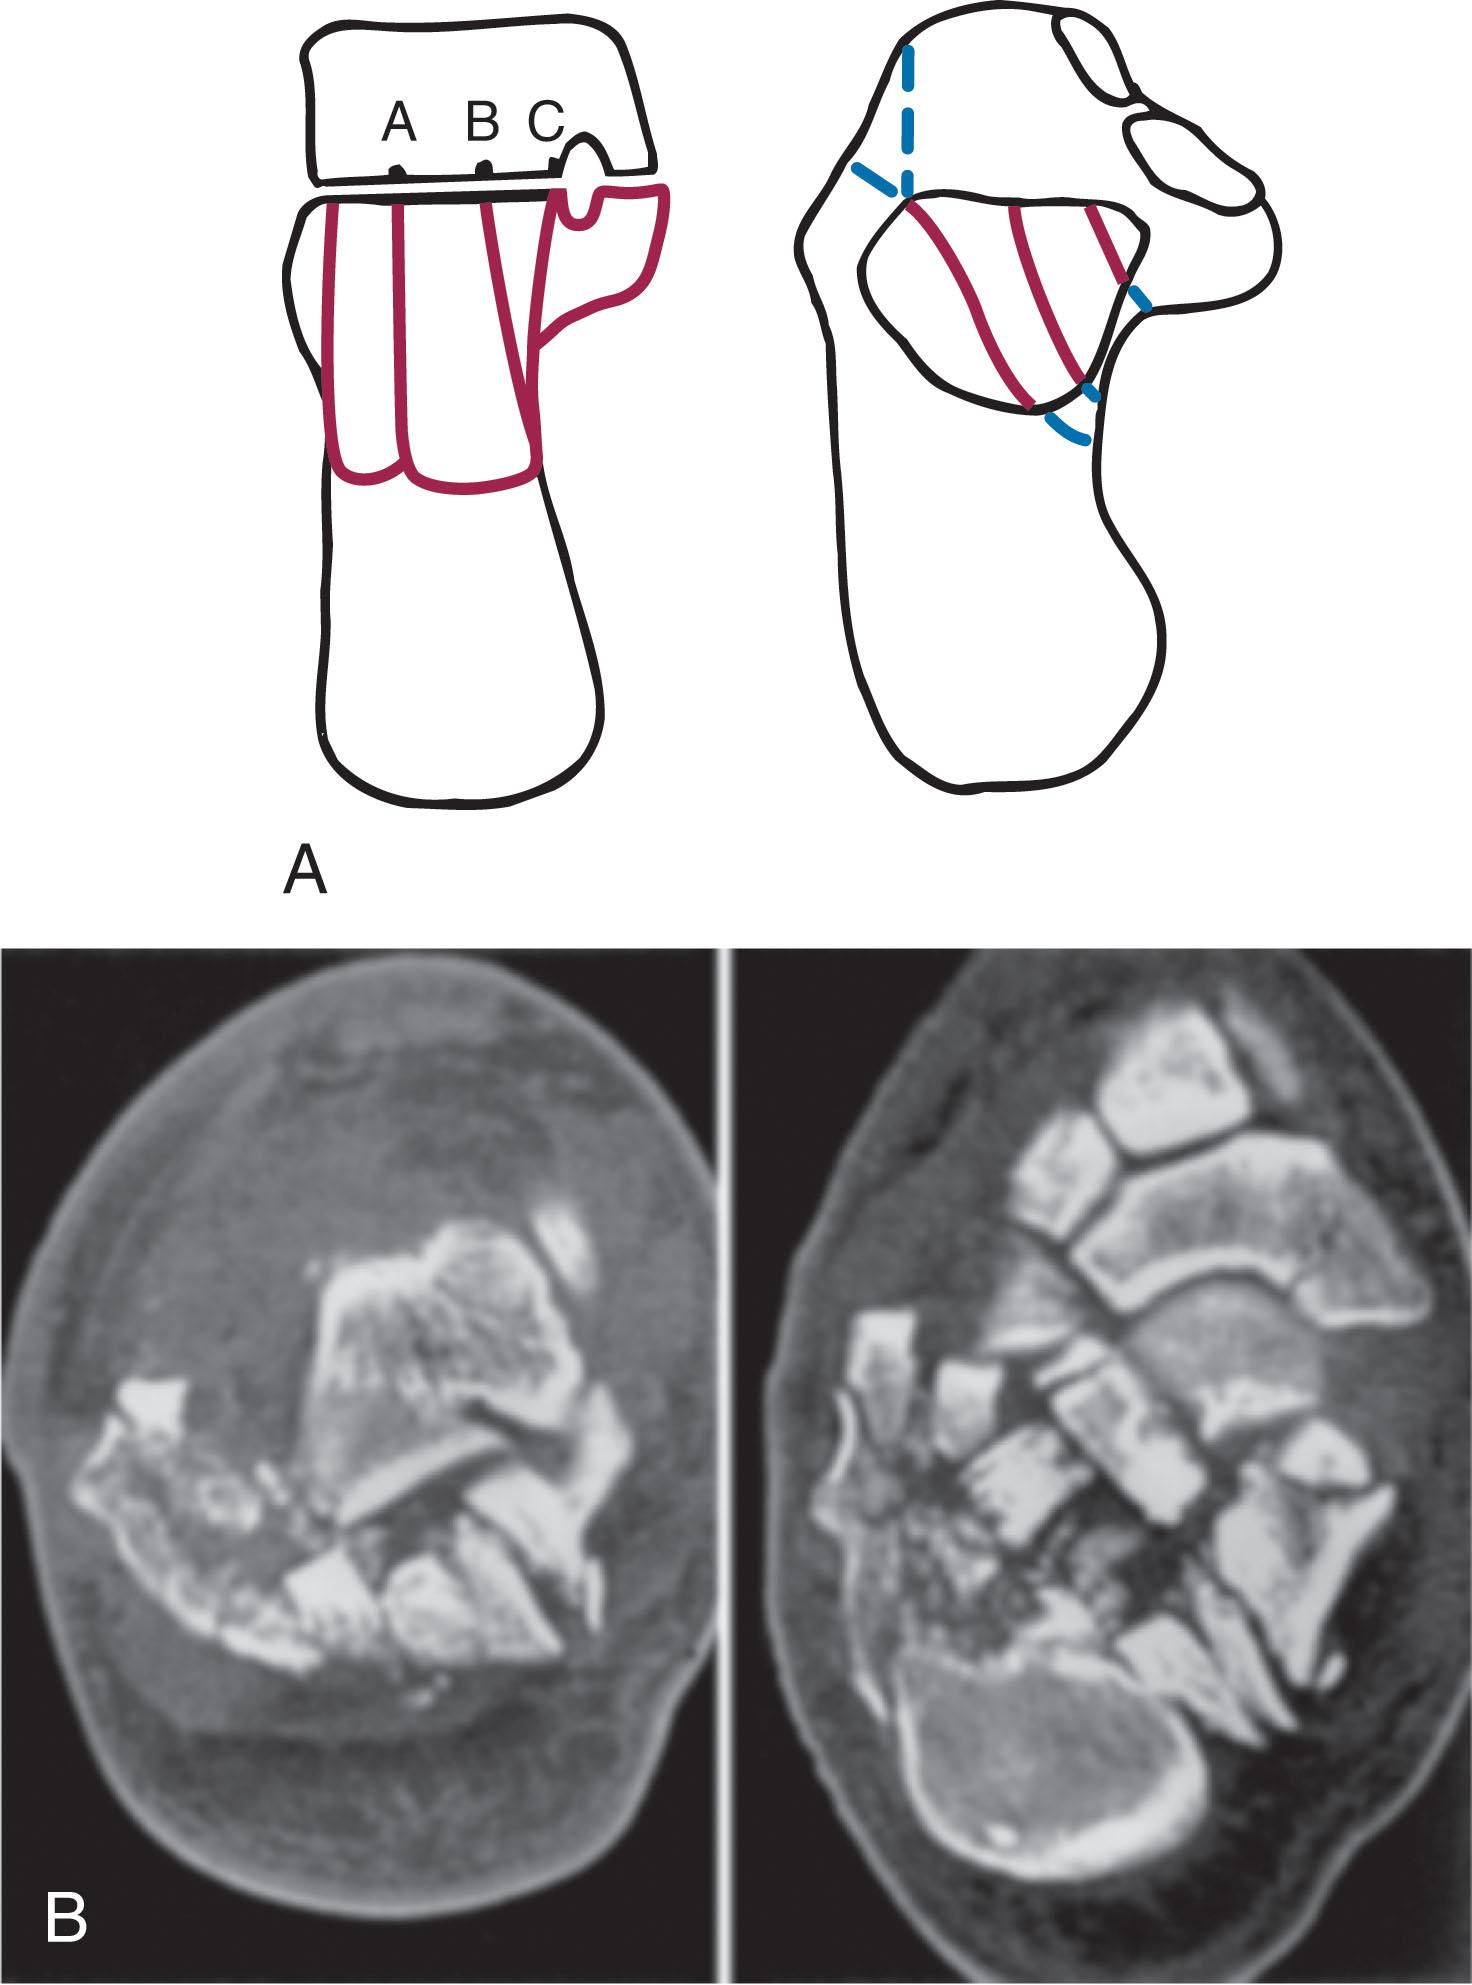 Fig. 45-19, Sanders type IV intraarticular calcaneal fracture. More than four articular fracture fragments may be present. A , Coronal and horizontal plane diagrams. B , Corresponding computed tomography images.